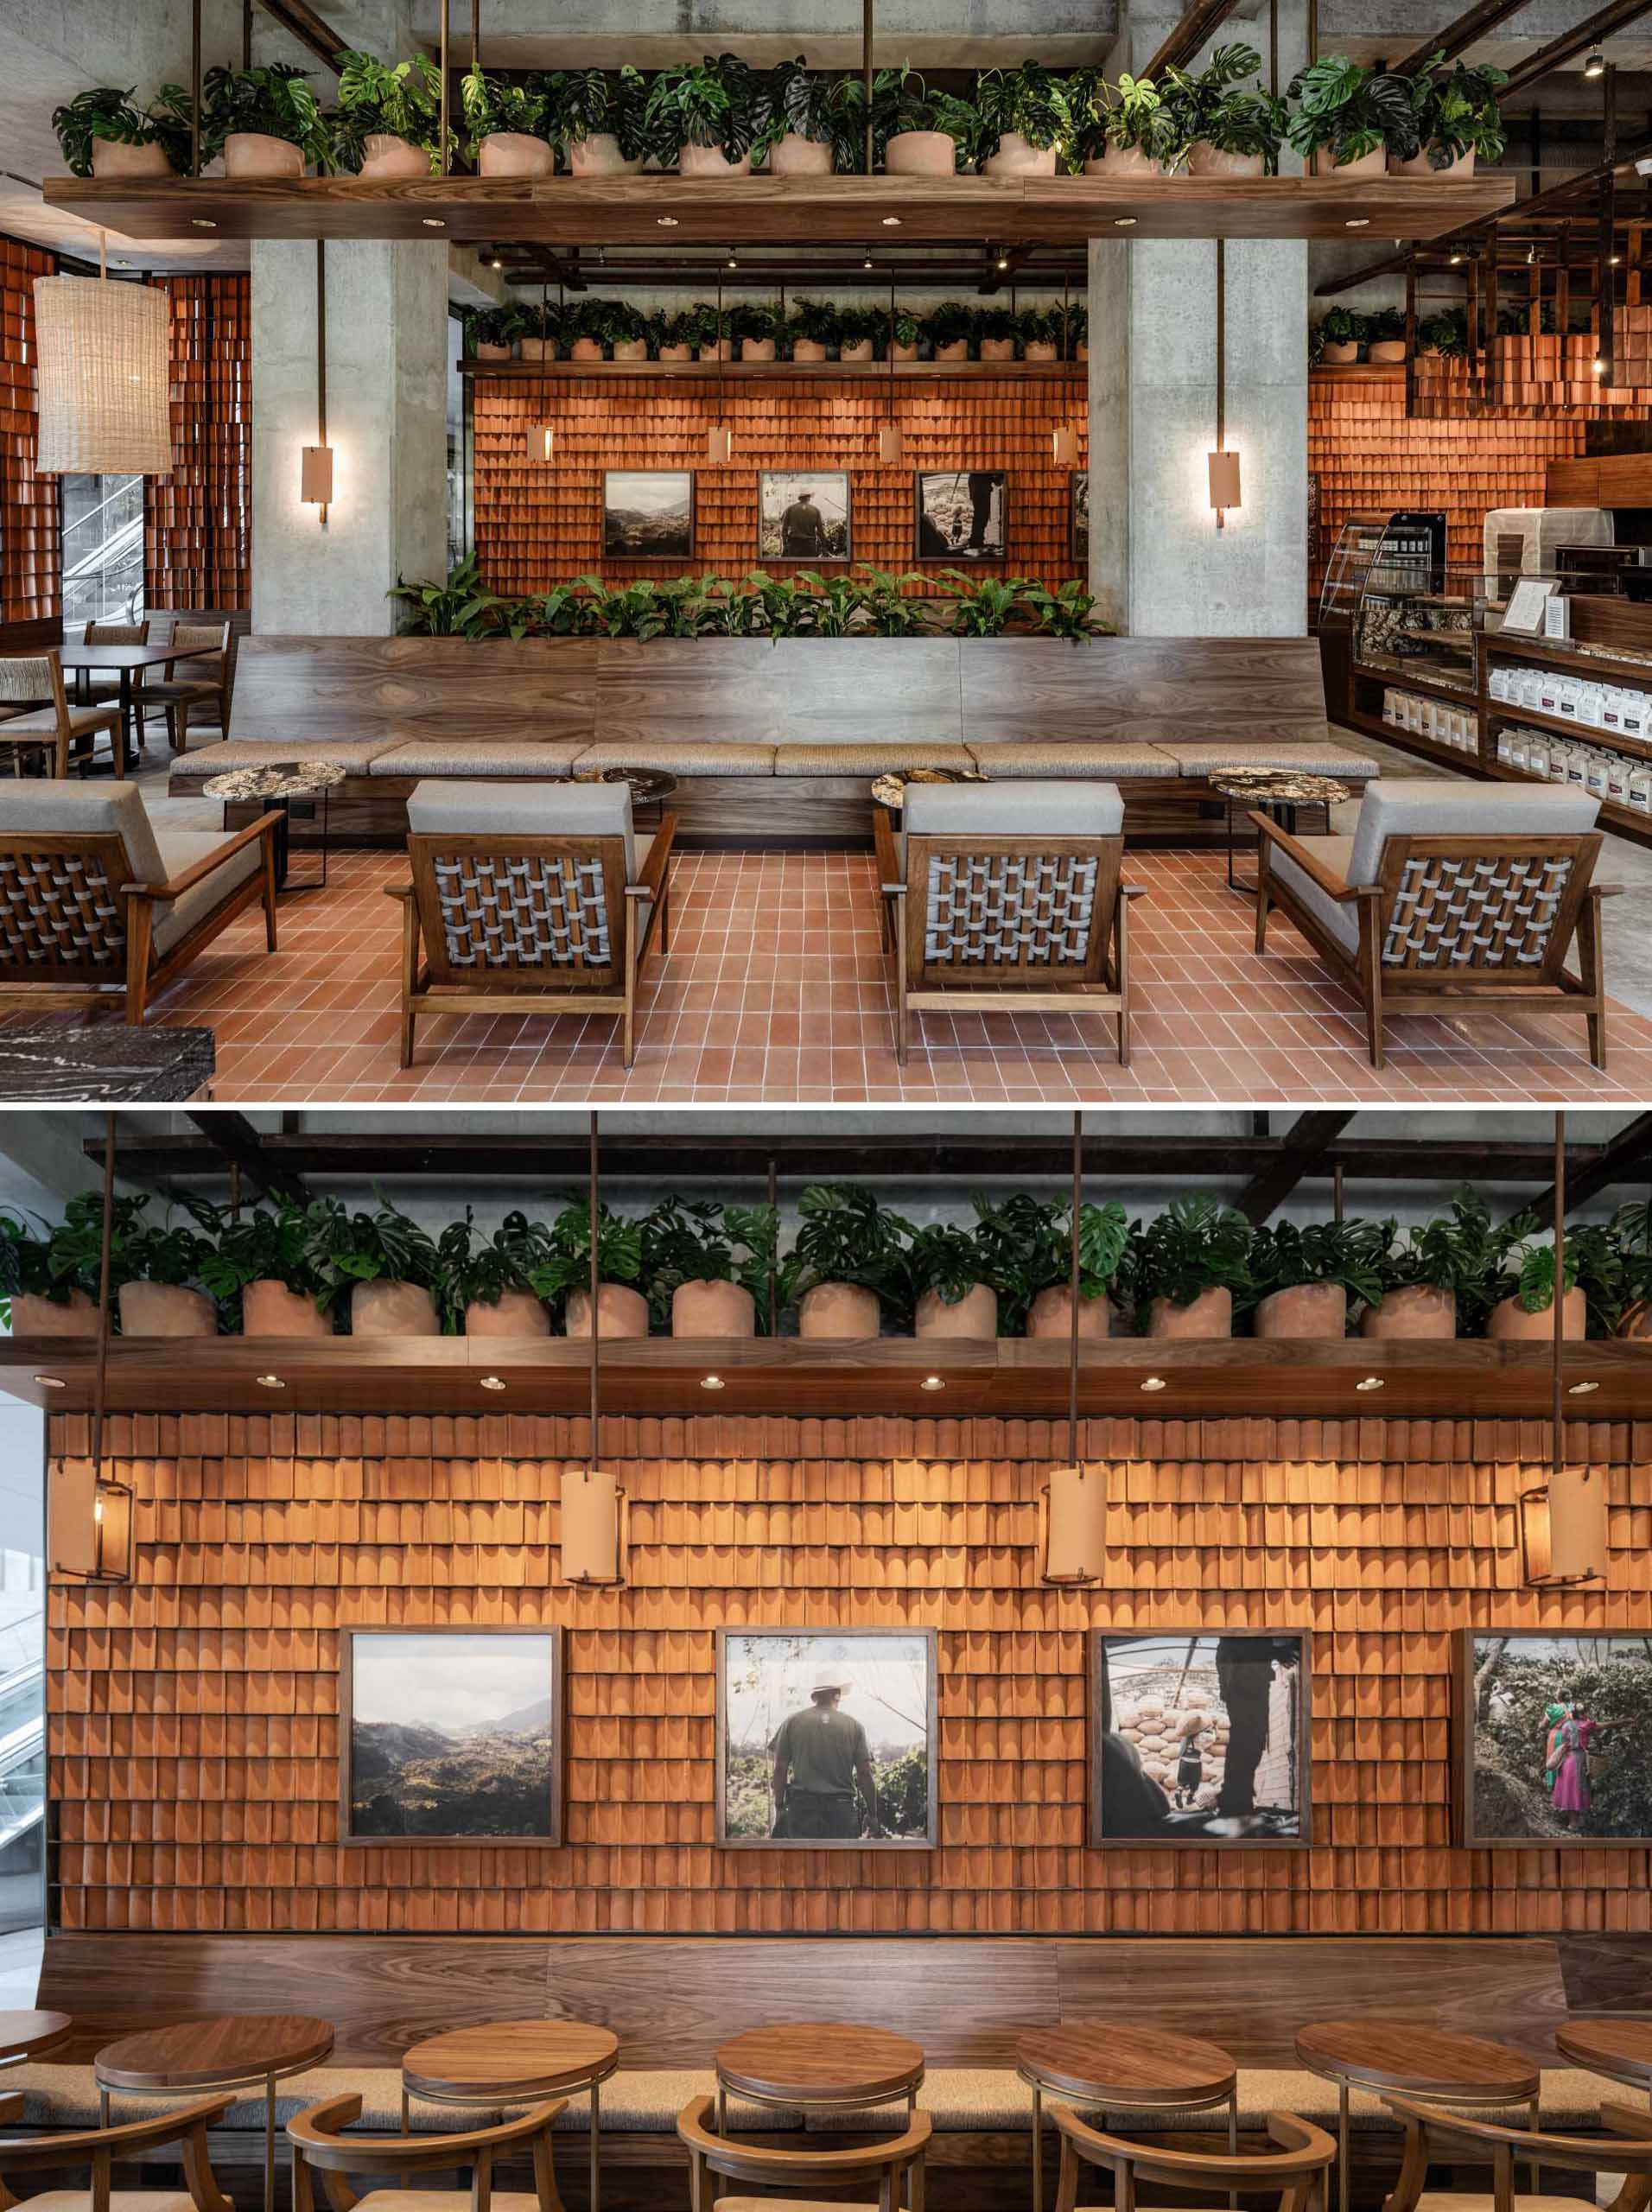 A modern coffee shop interior with plants, clay tiles, wood, and raw concrete.